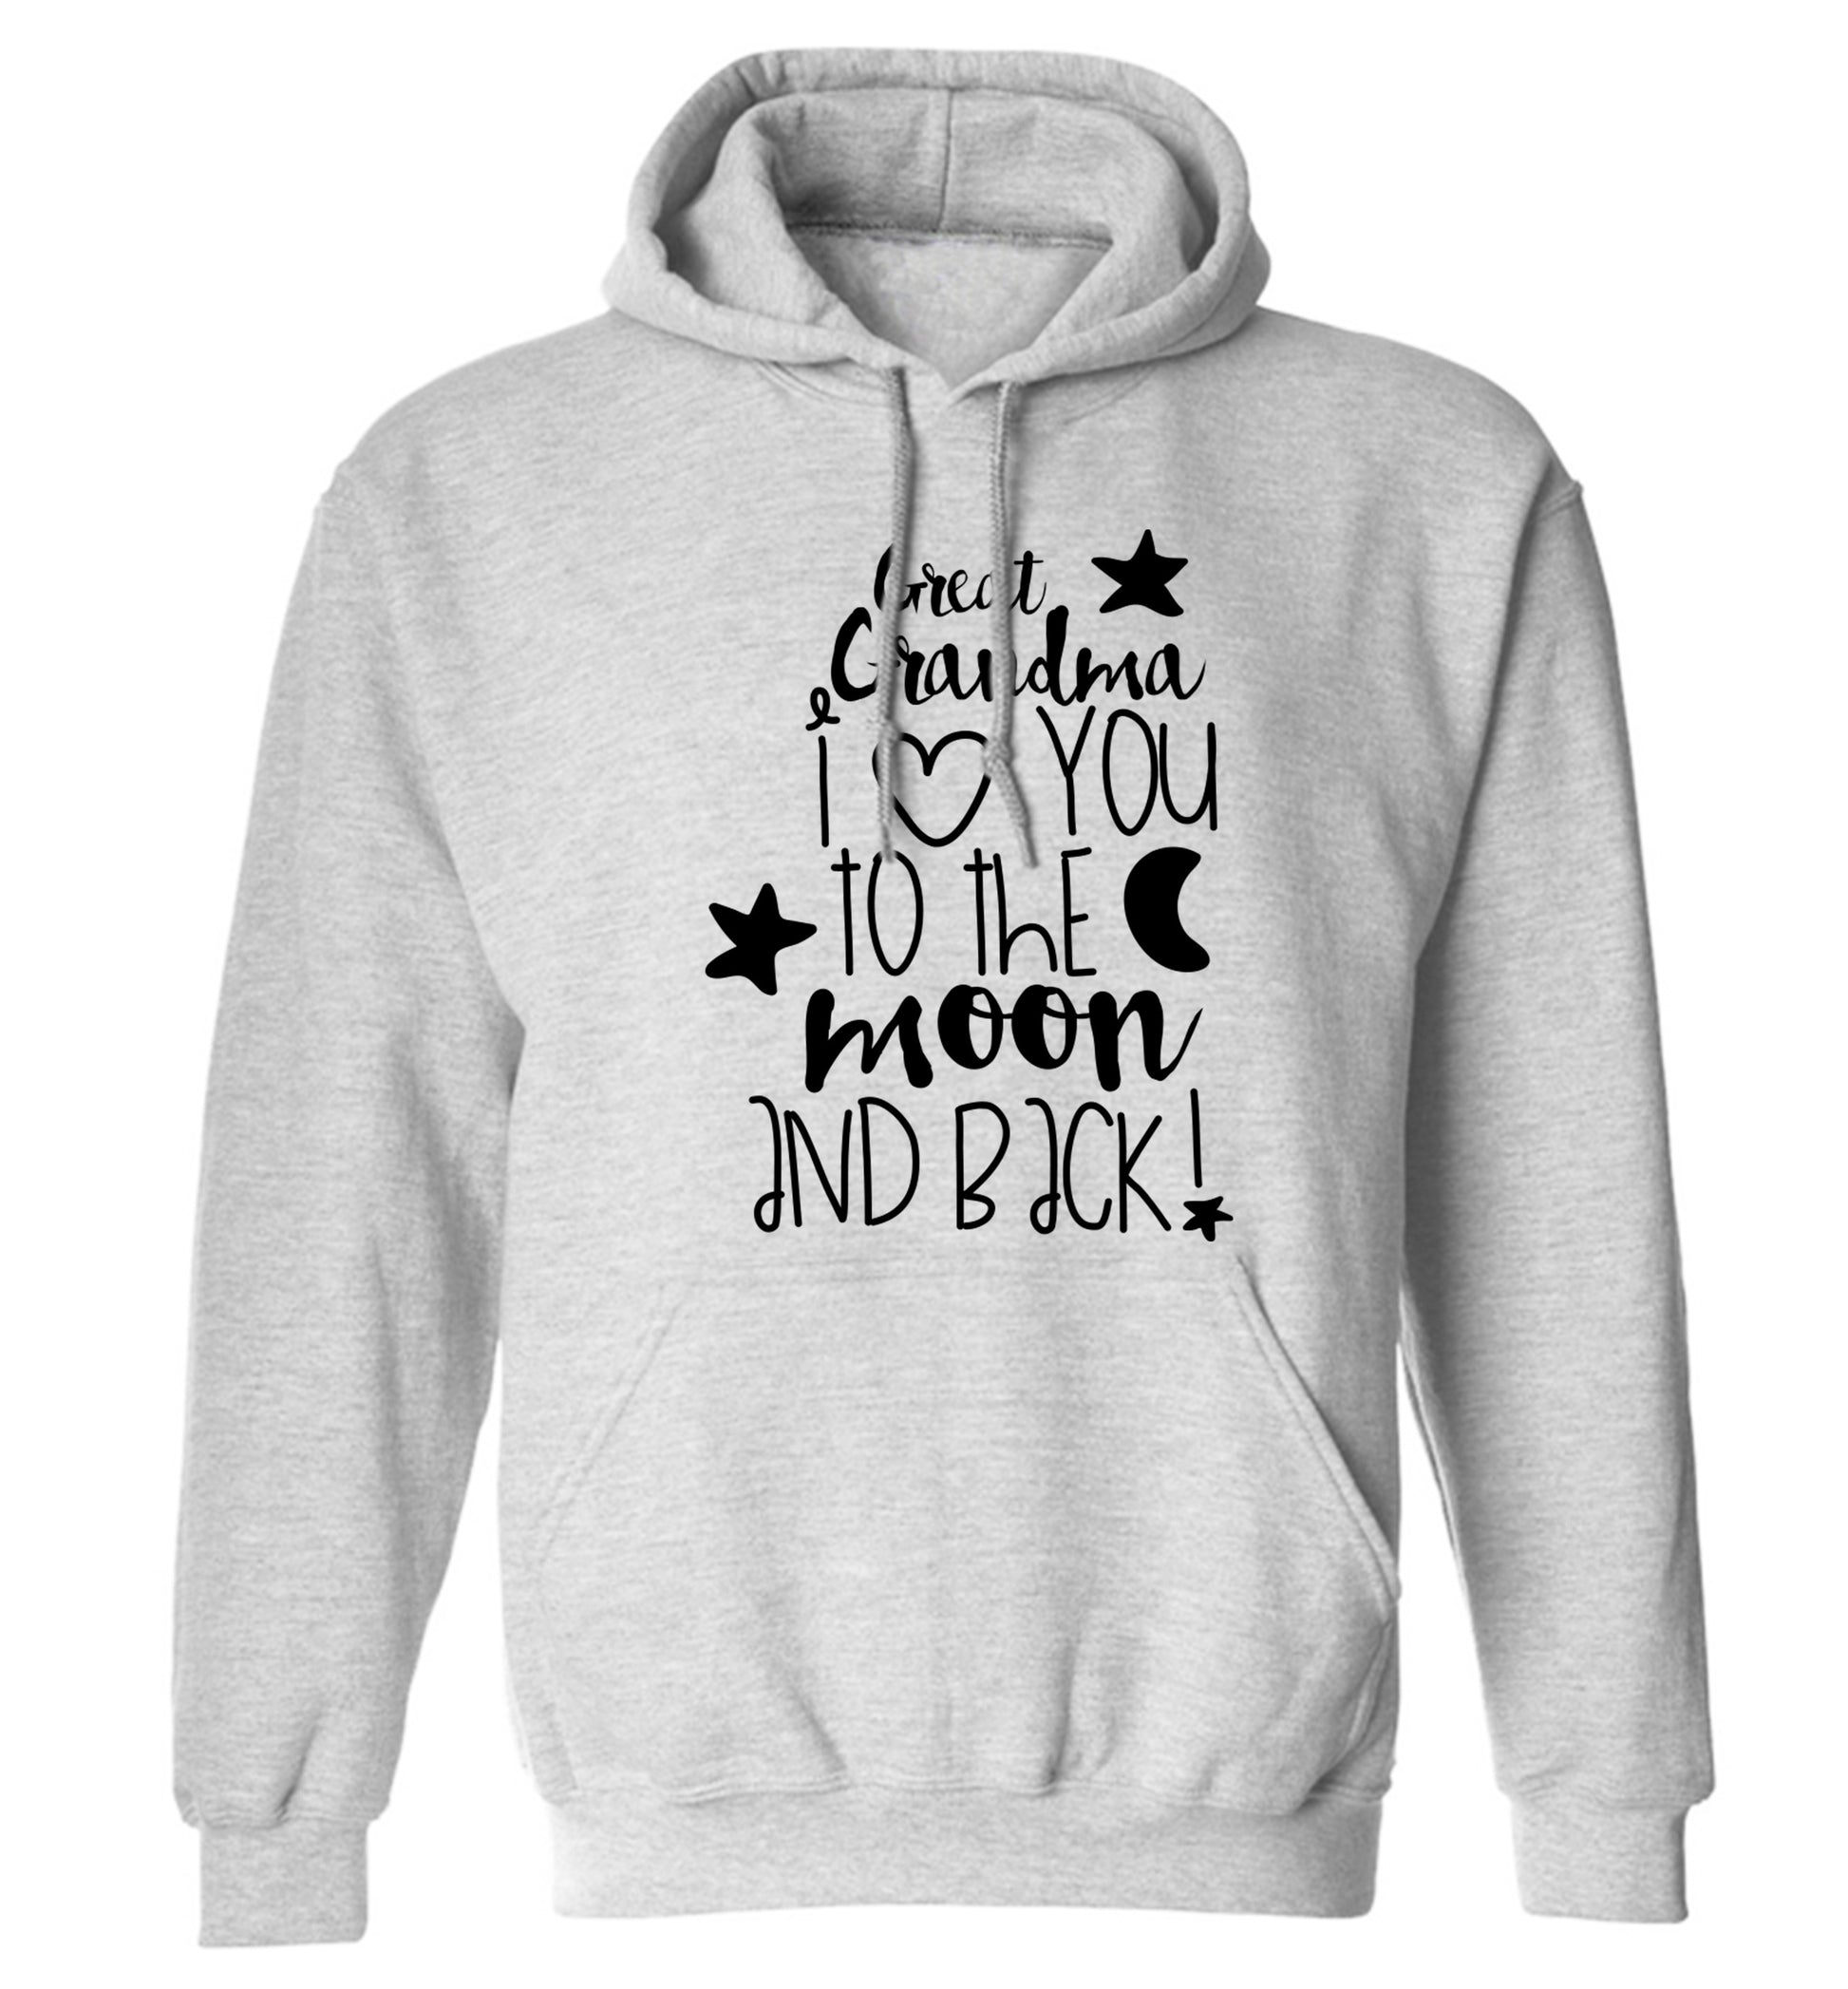 Great Grandma I love you to the moon and back adults unisex grey hoodie 2XL